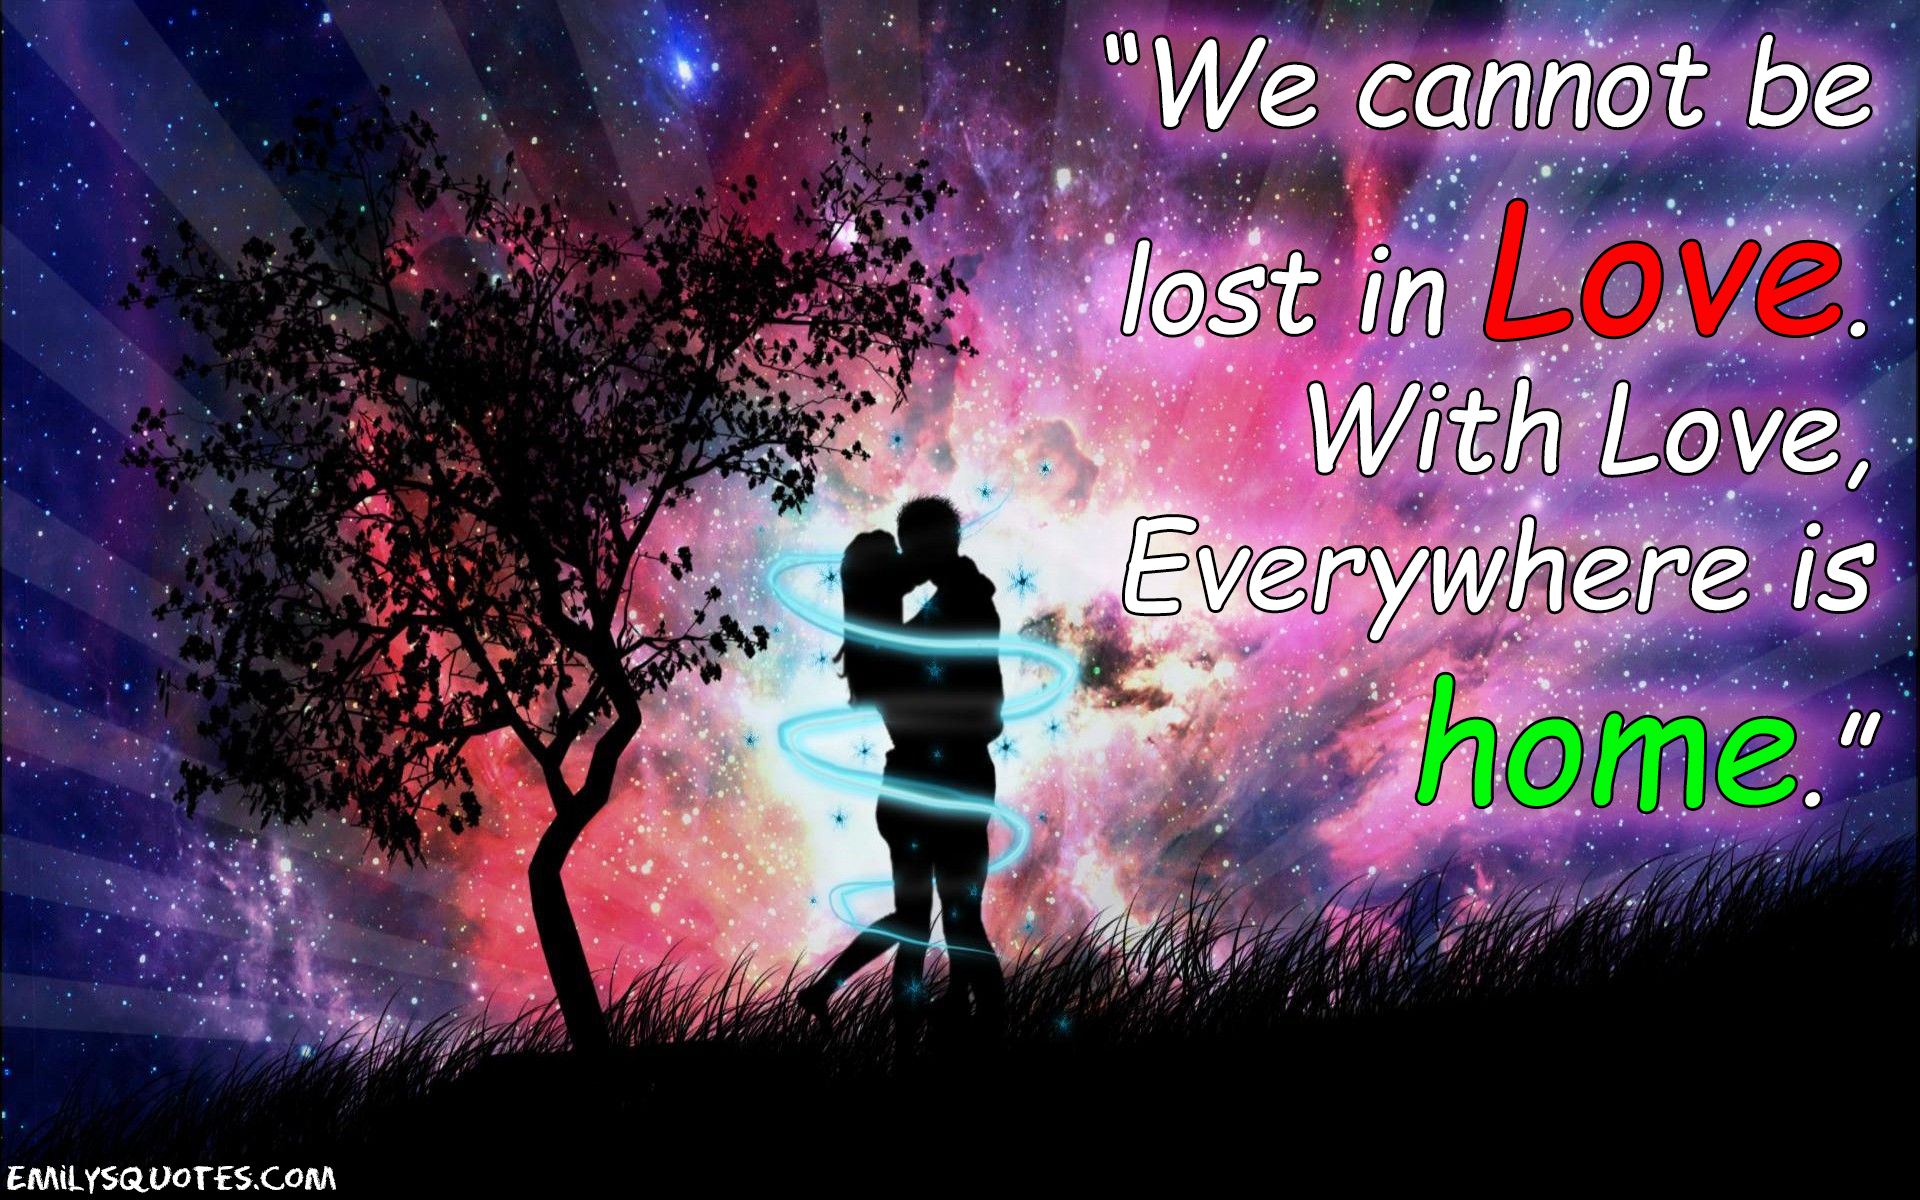 We cannot be lost in Love. With Love, Everywhere is home